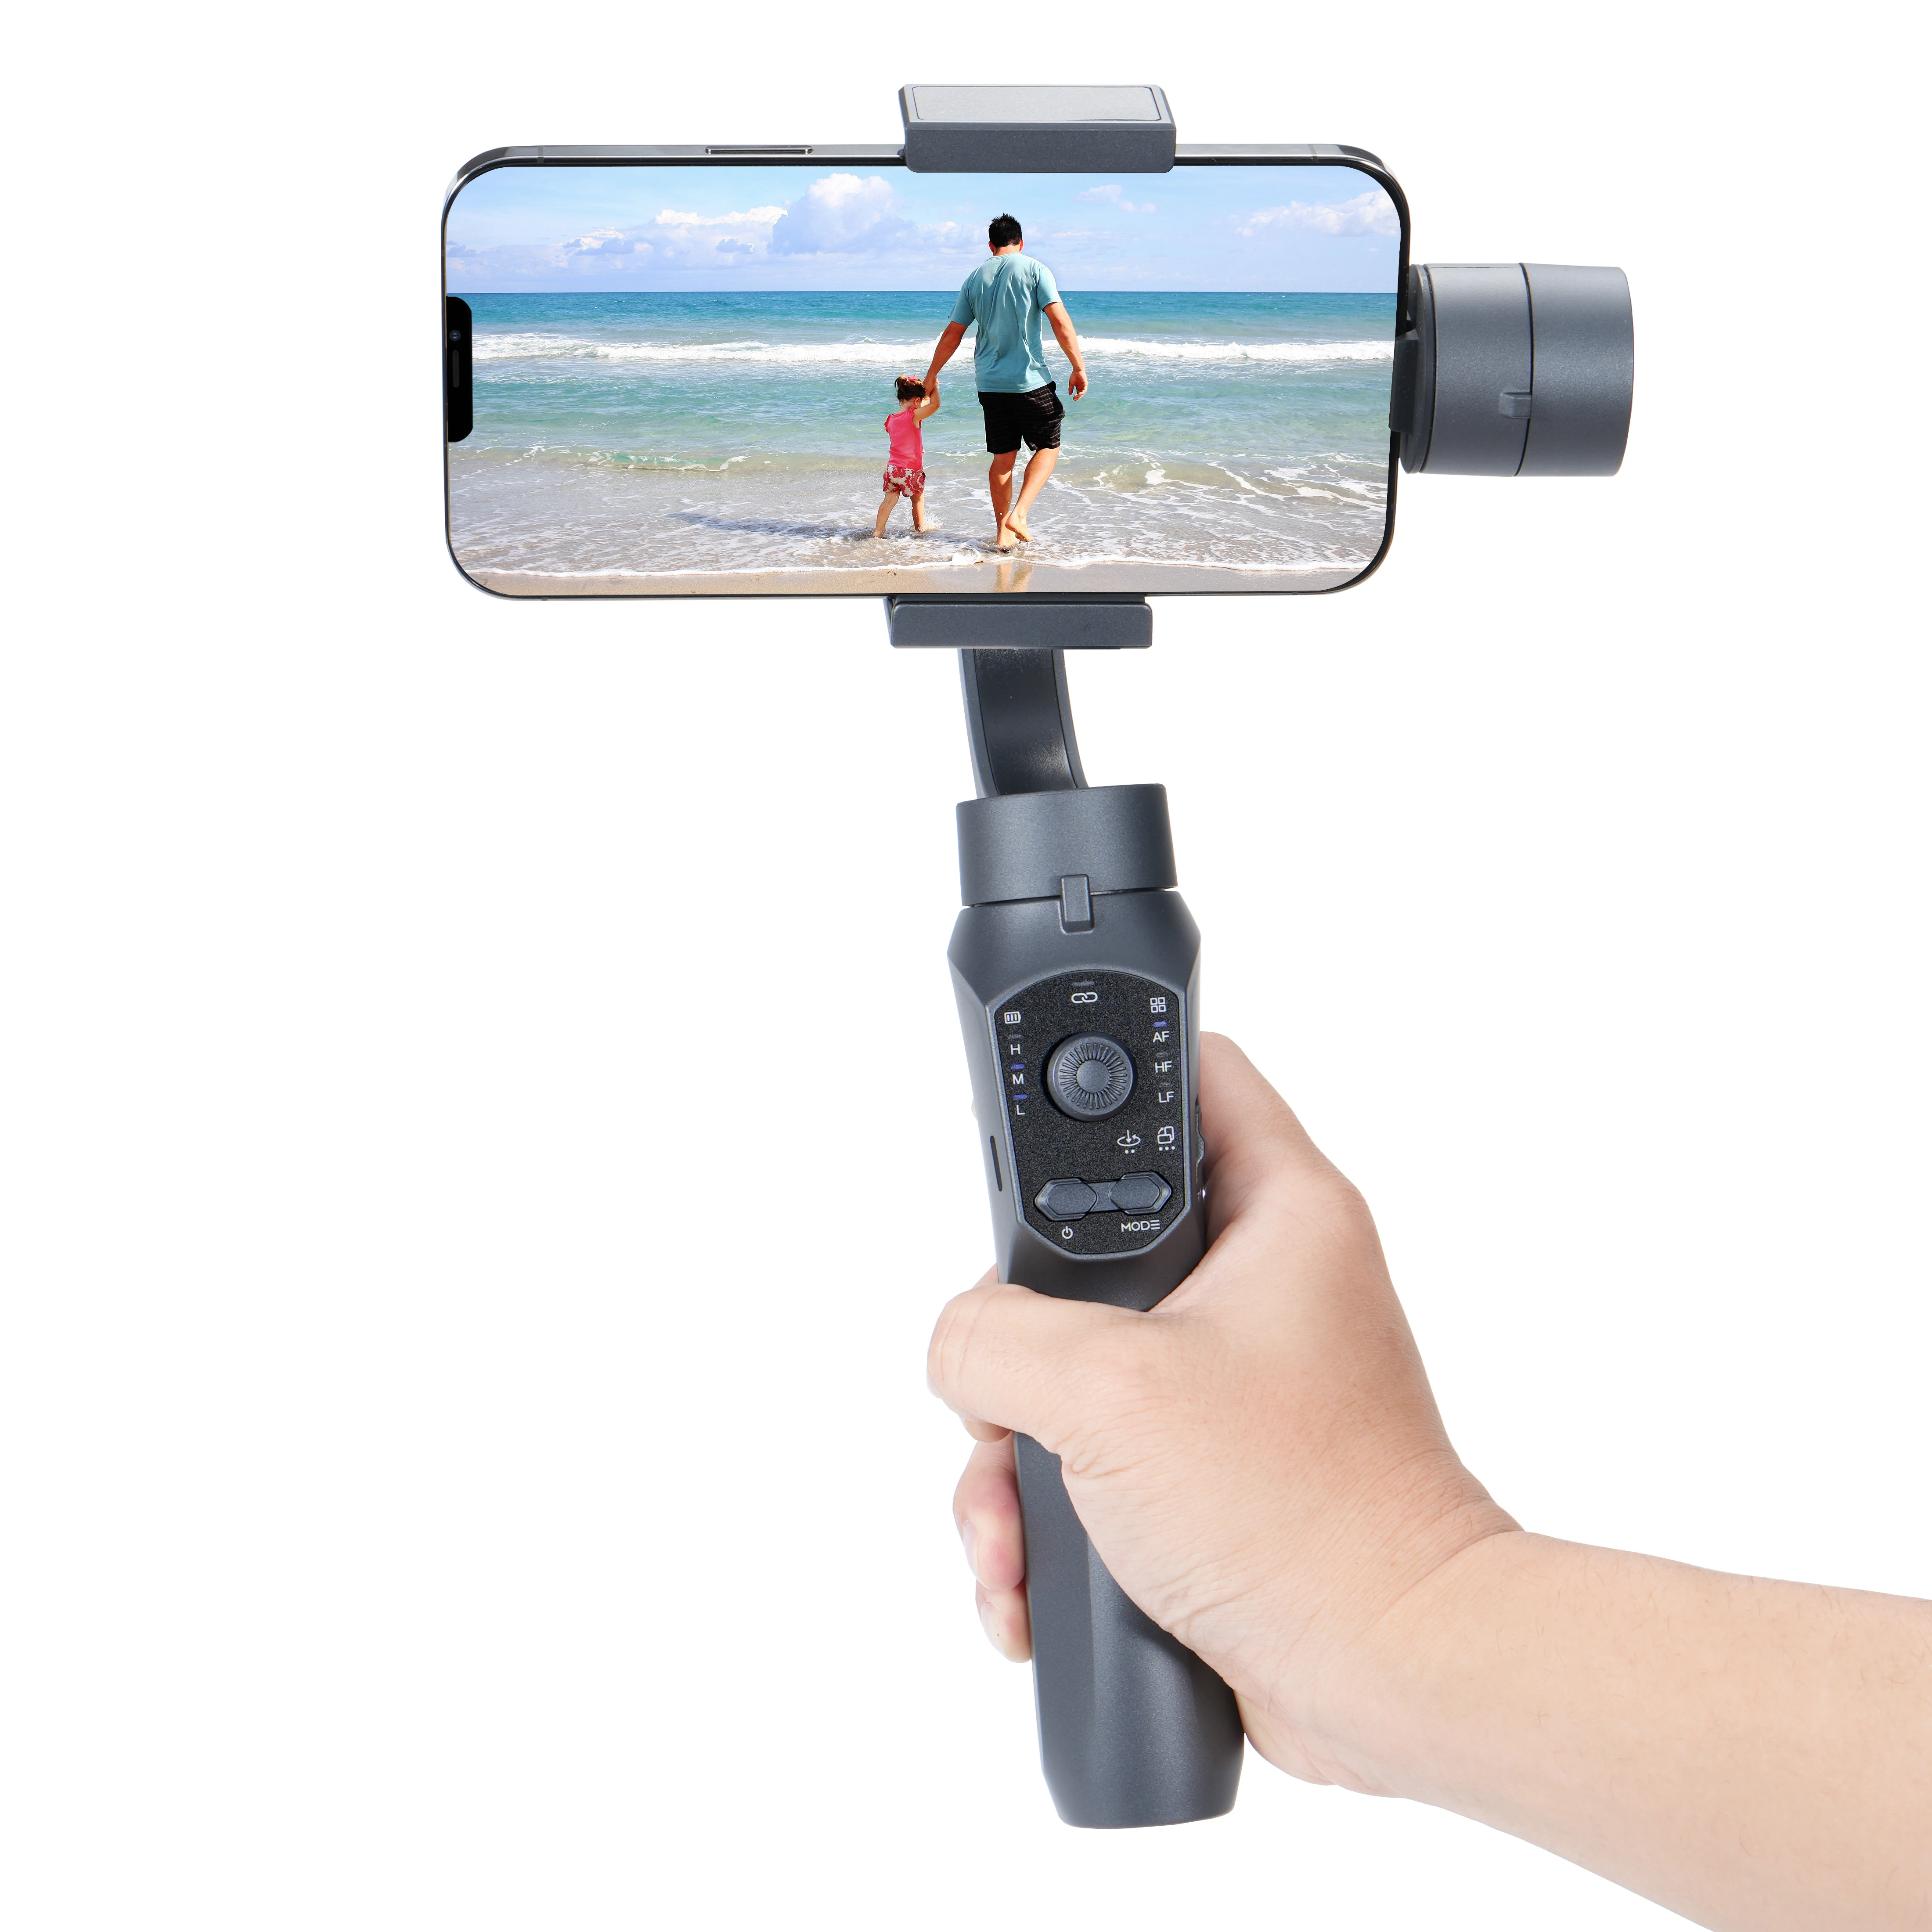 

KALIOU F10Pro New Arrival 3 Axis Gimbal Stabilizer Handheld Phone Stabilizer with Tripod Stand Selfie Stick Gimbal Stabilizer